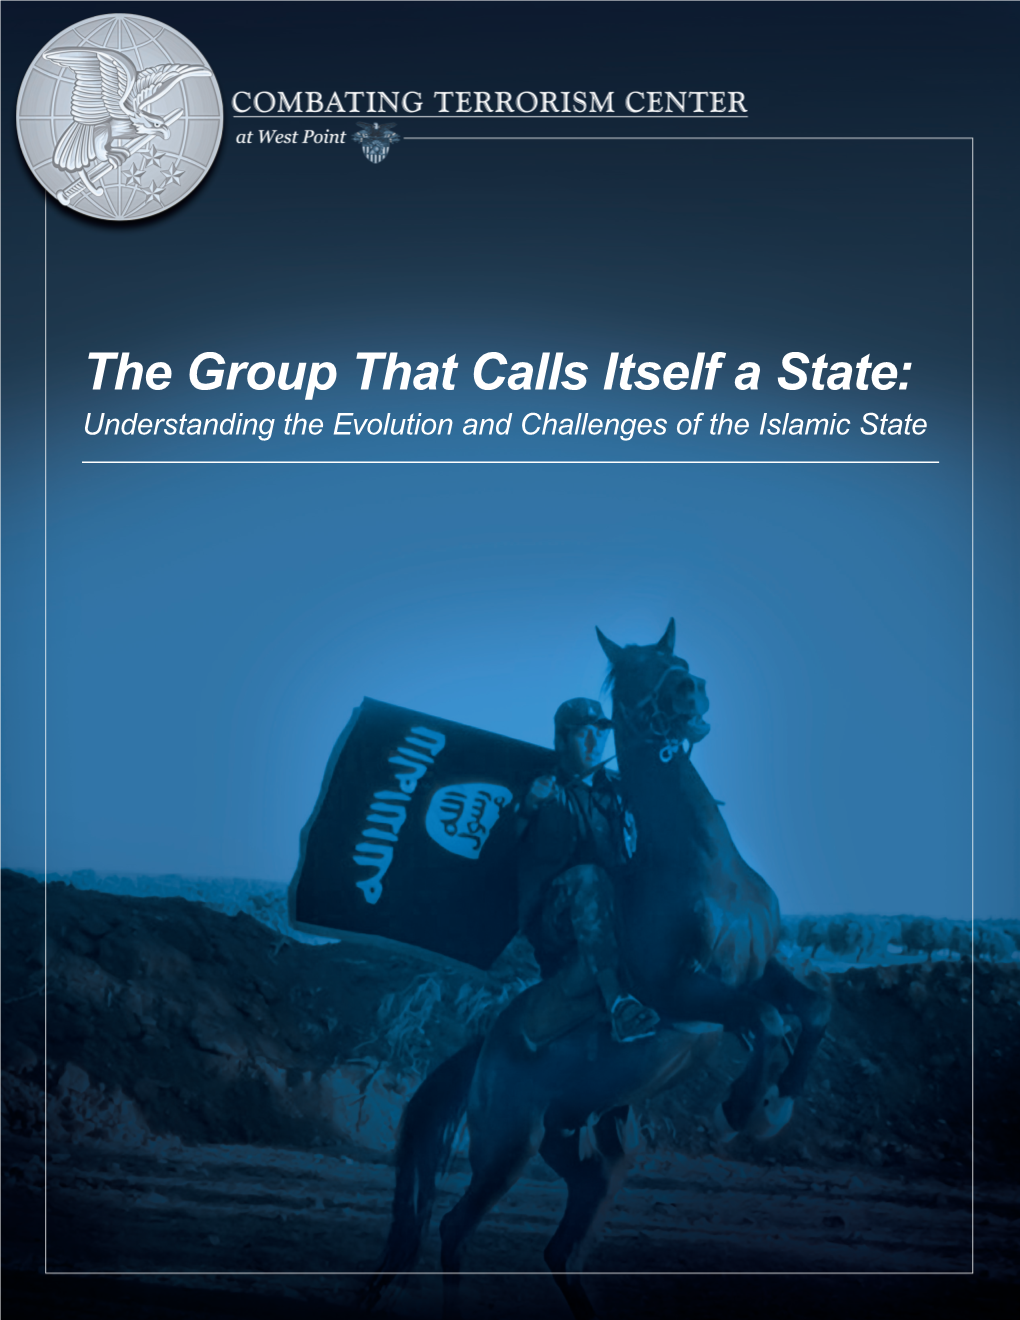 The Group That Calls Itself a State: Understanding the Evolution and Challenges of the Islamic State